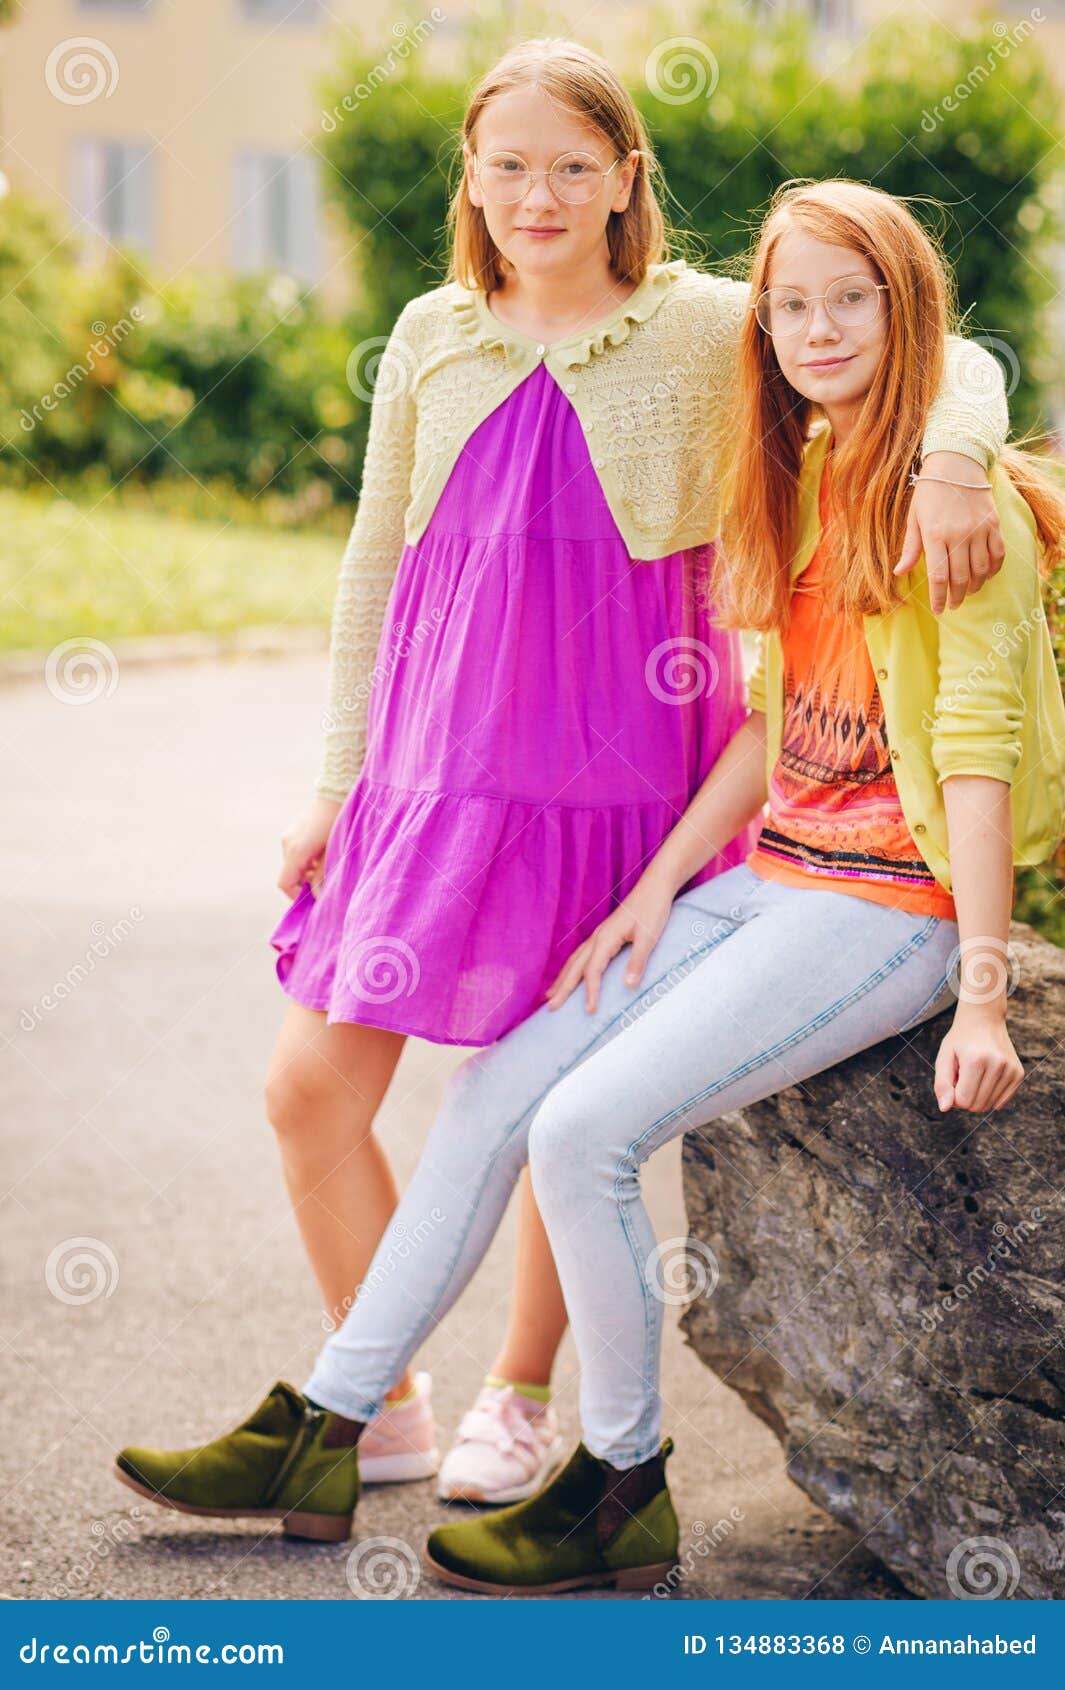 Outdoor Portrait Of Two Funny Pr